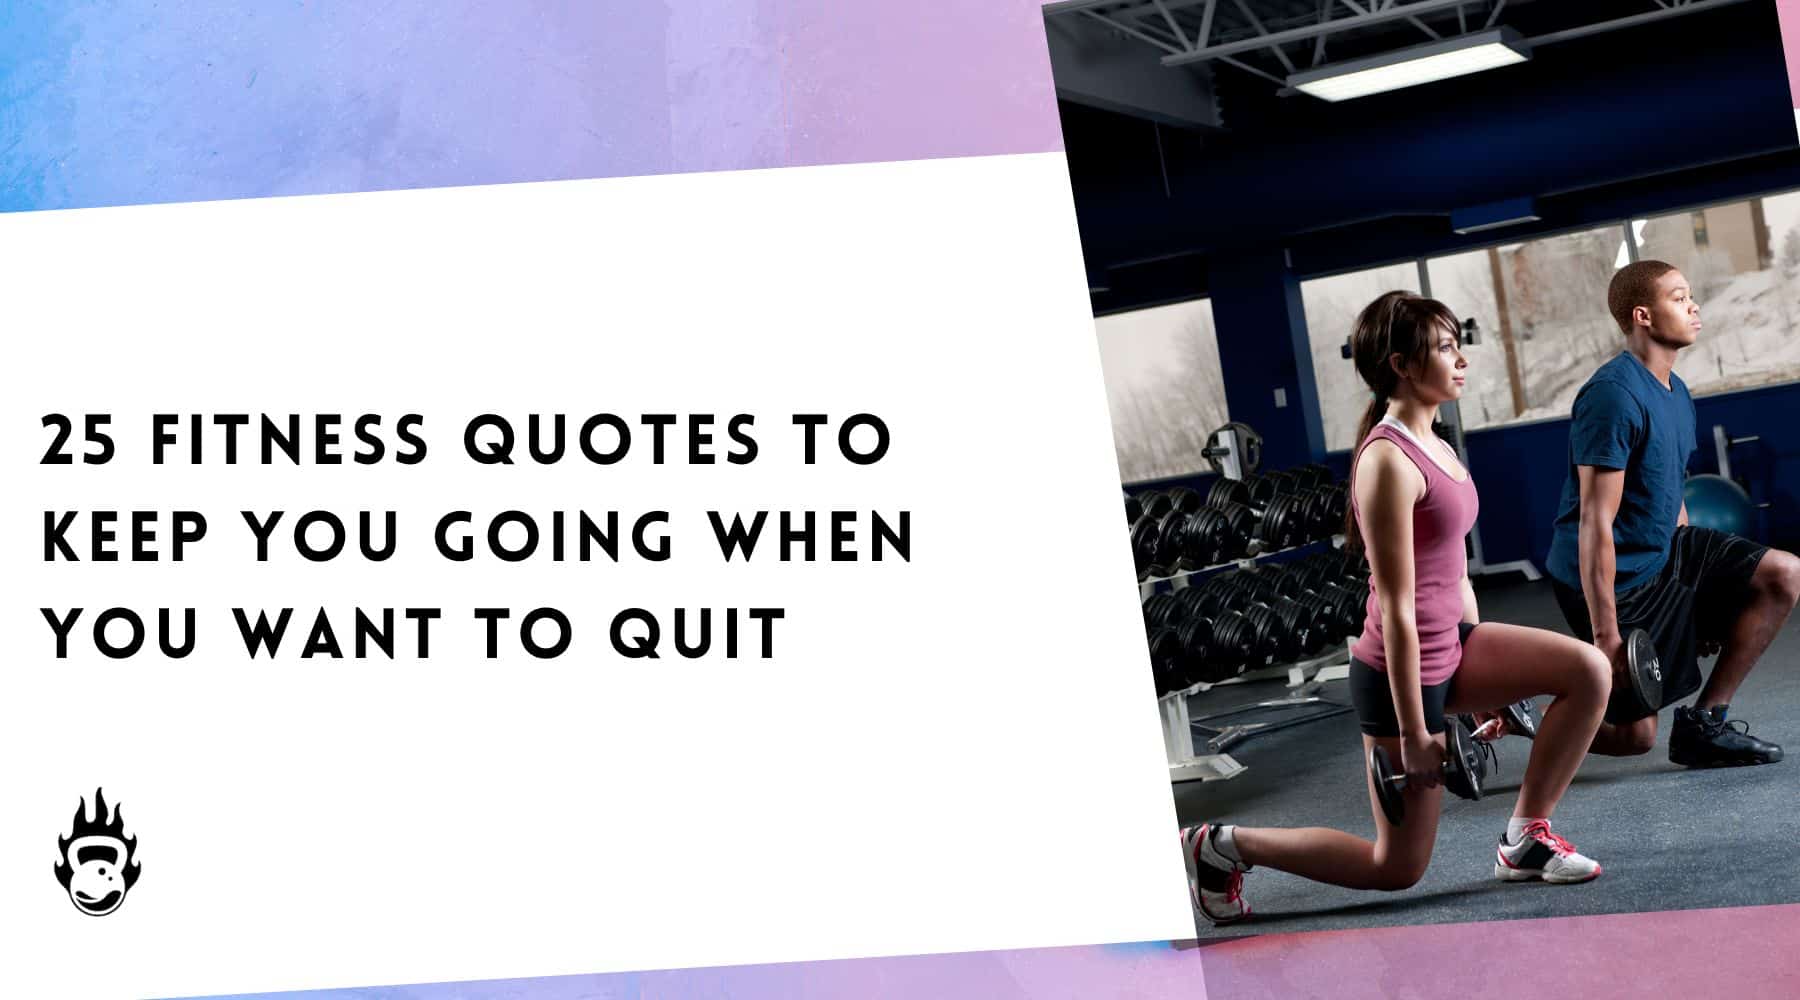 25 Fitness Quotes to Keep You Going When You Want to Quit –